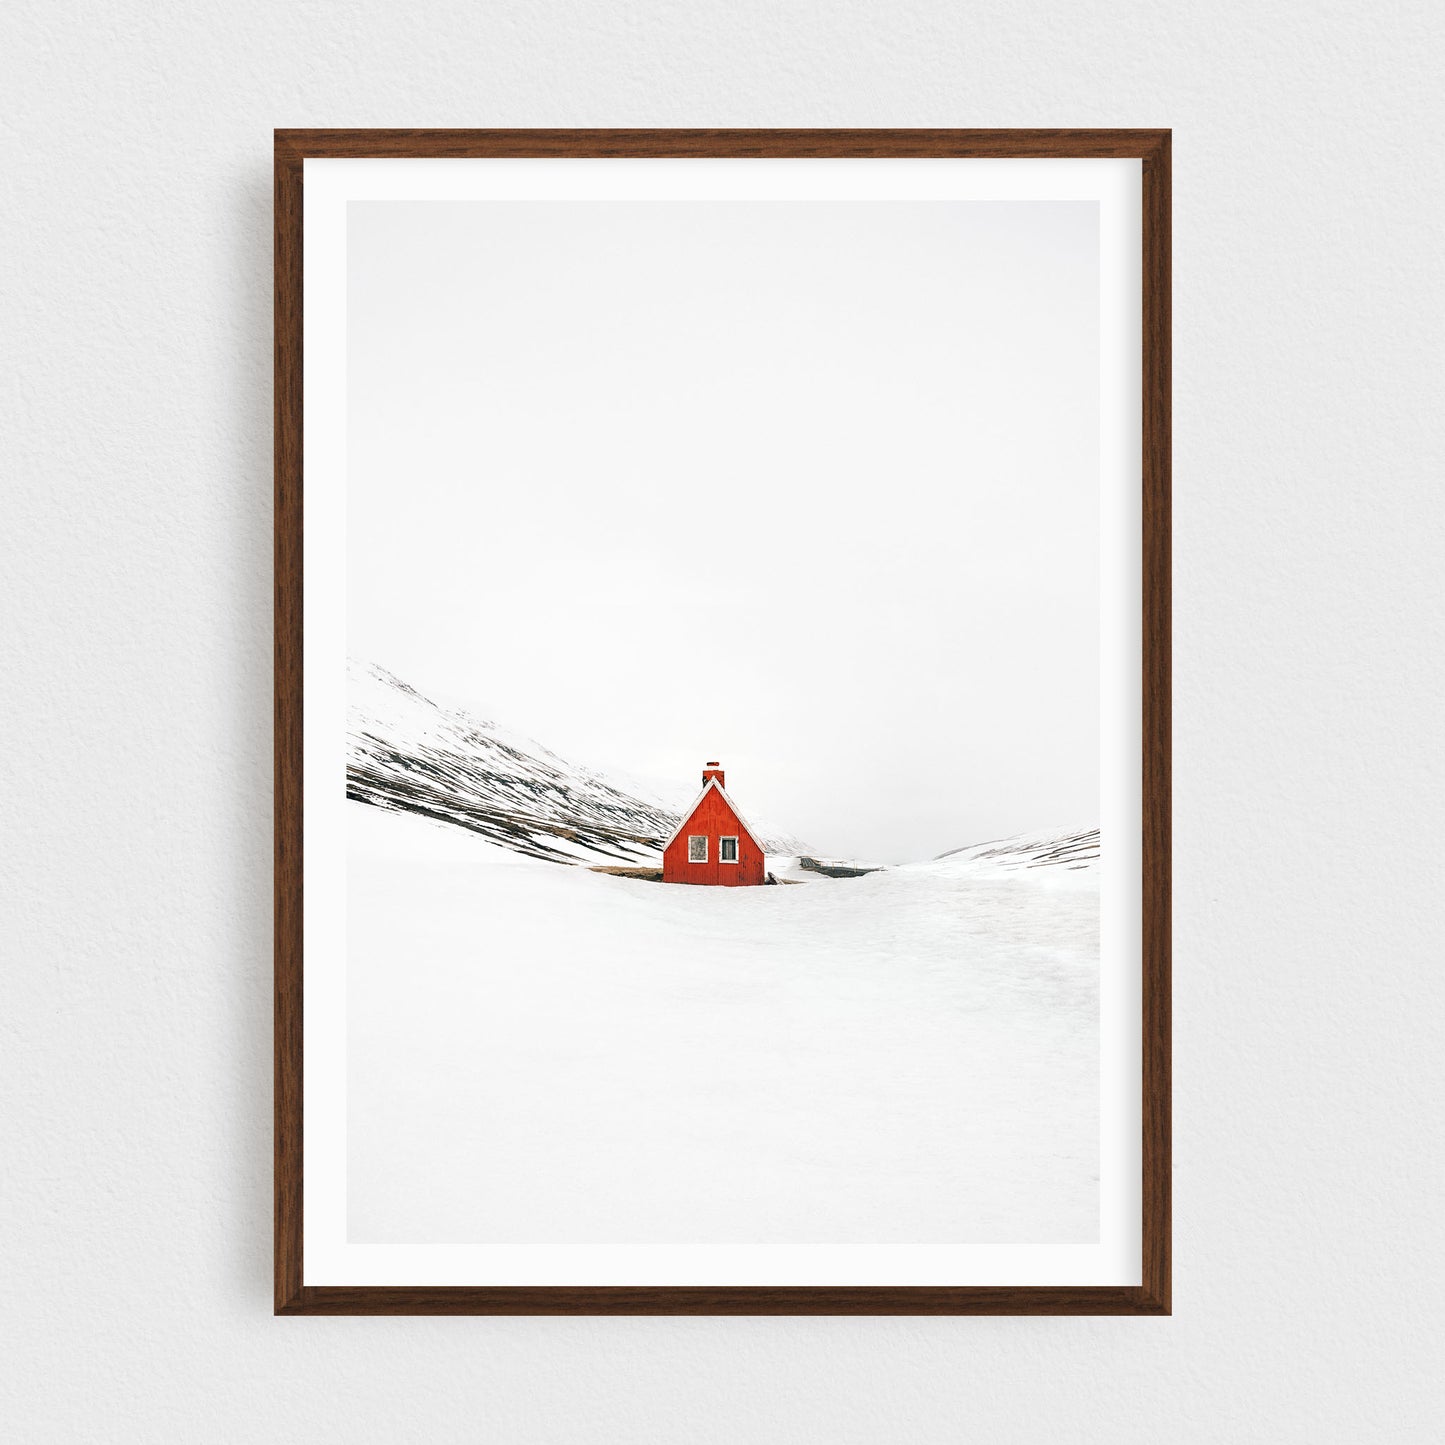 Iceland fine art photography print featuring a red cabin in winter, in a walnut frame